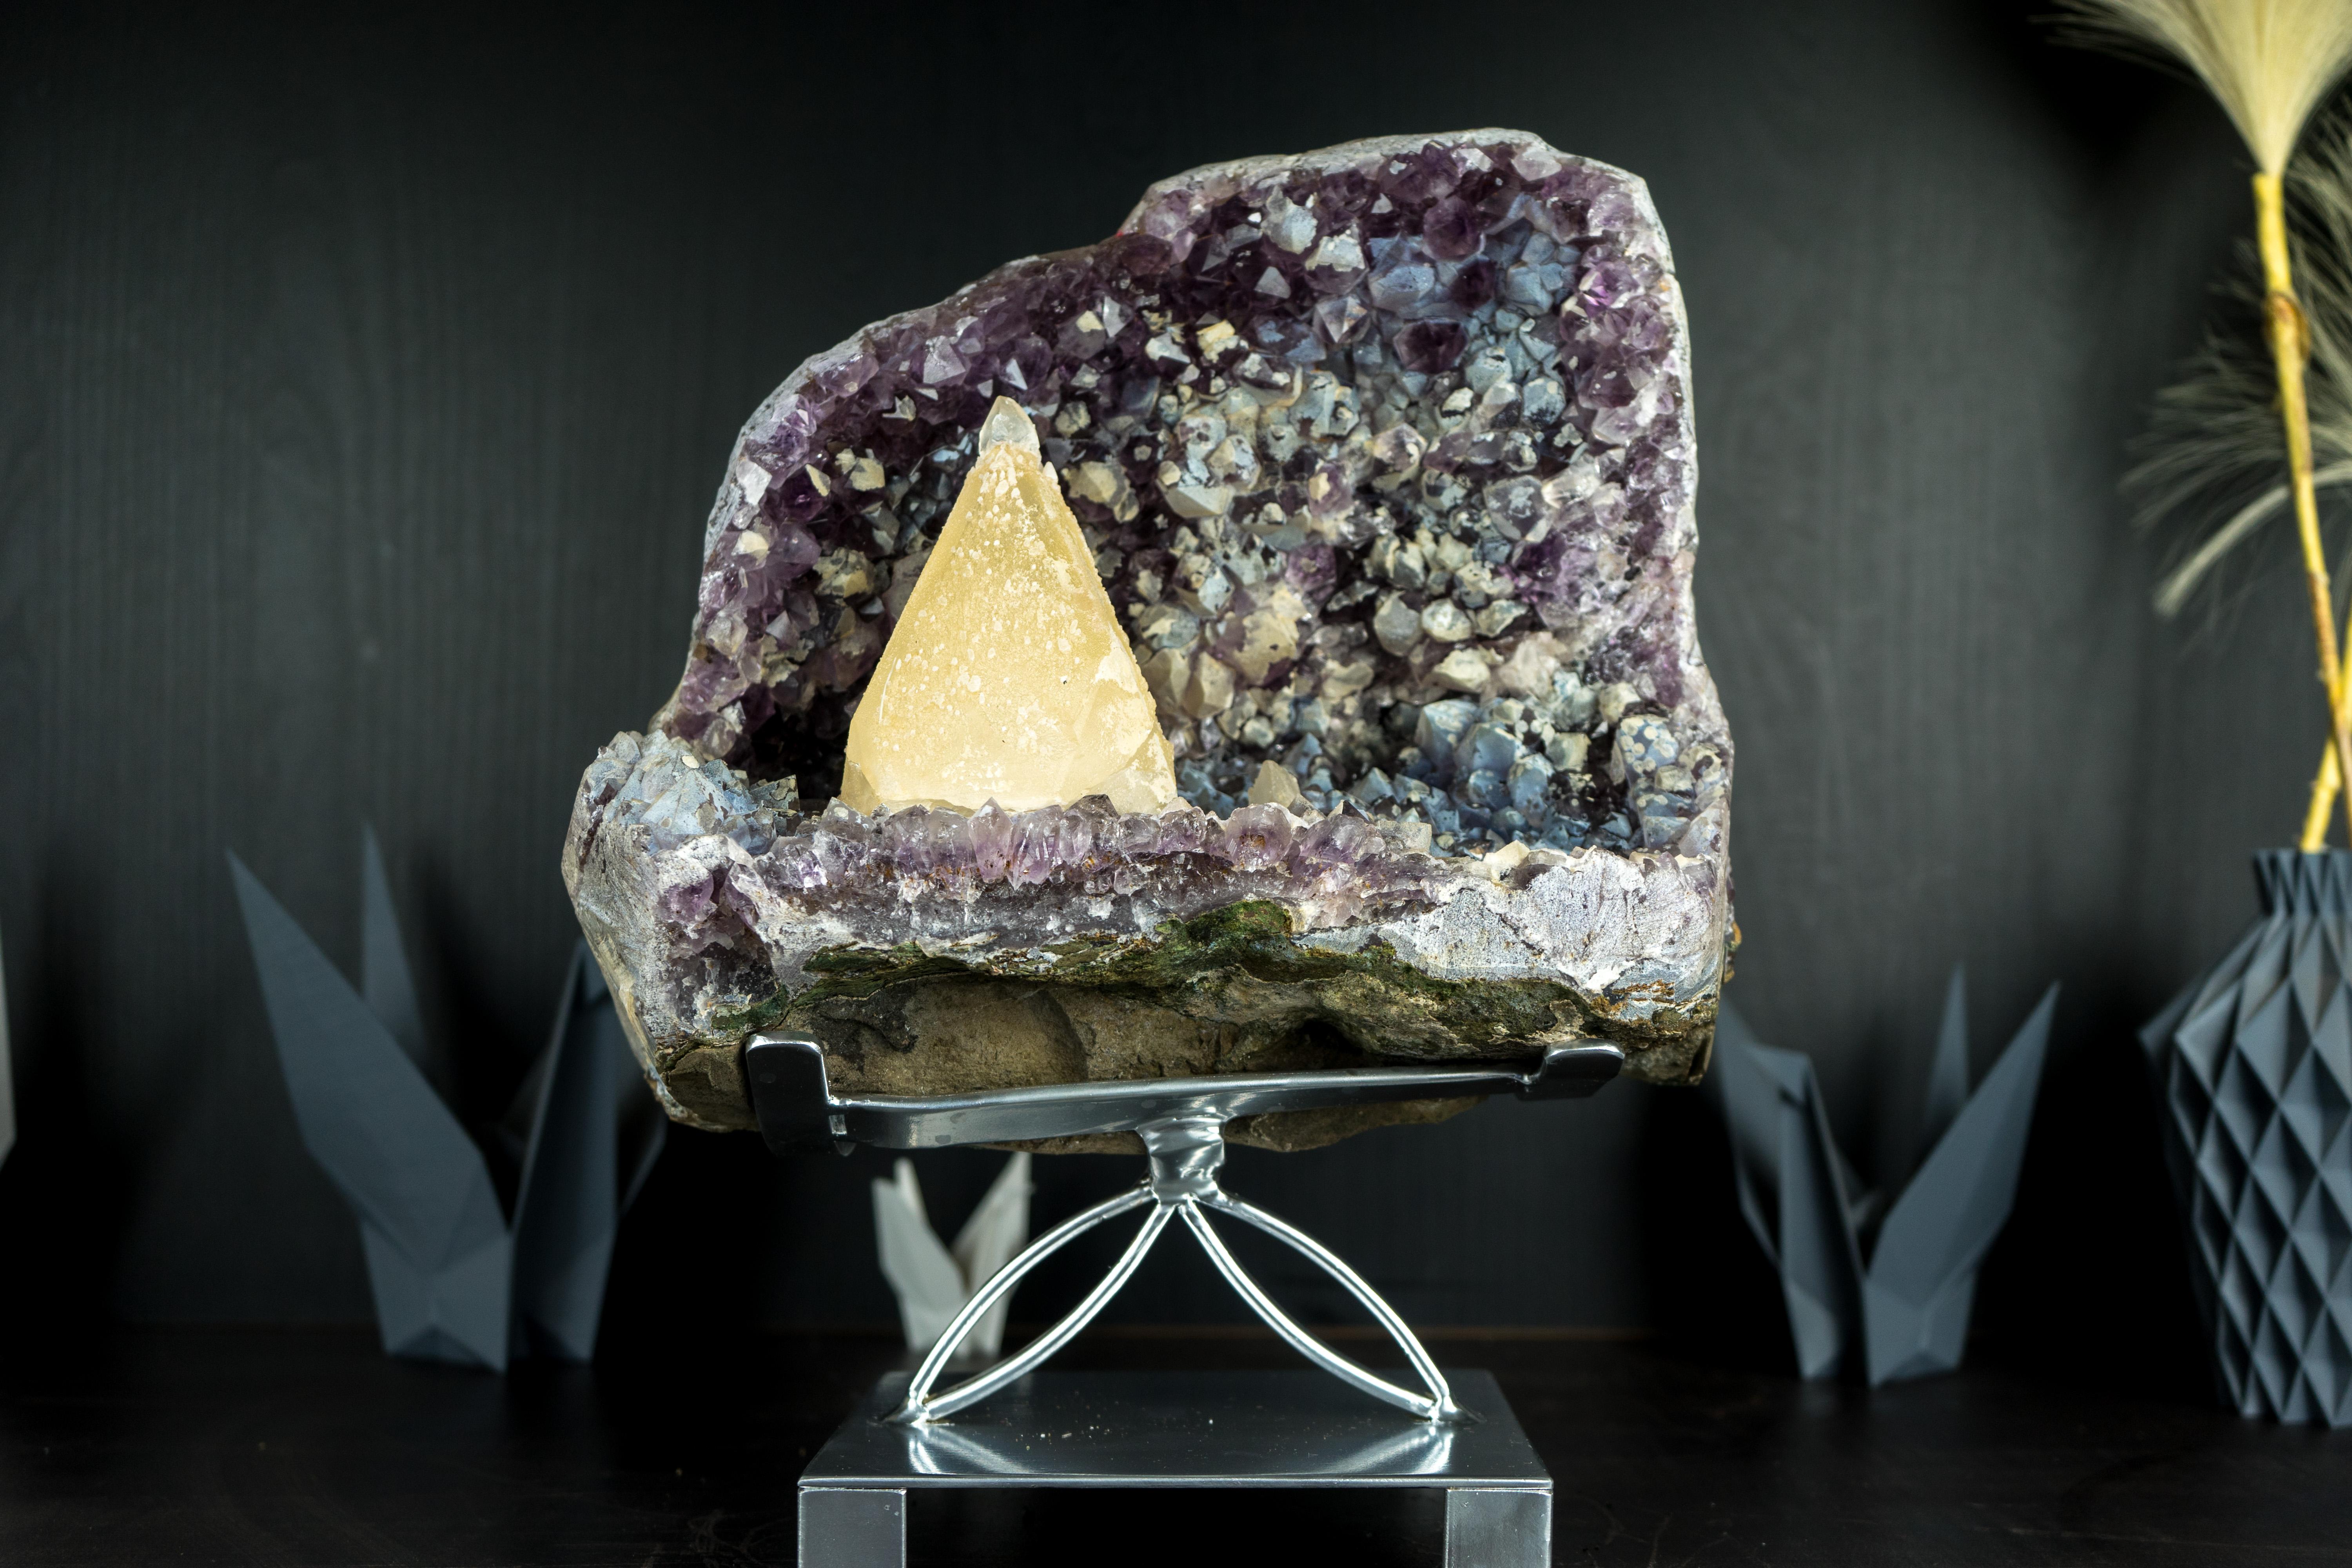 A rare calcite specimen from the famous Brazilian Toldinho Mine, this magnificent, museum-quality piece sits beautifully on a bed of amethyst, forming a mineral masterpiece that will surely find its way into a renowned collection or become the